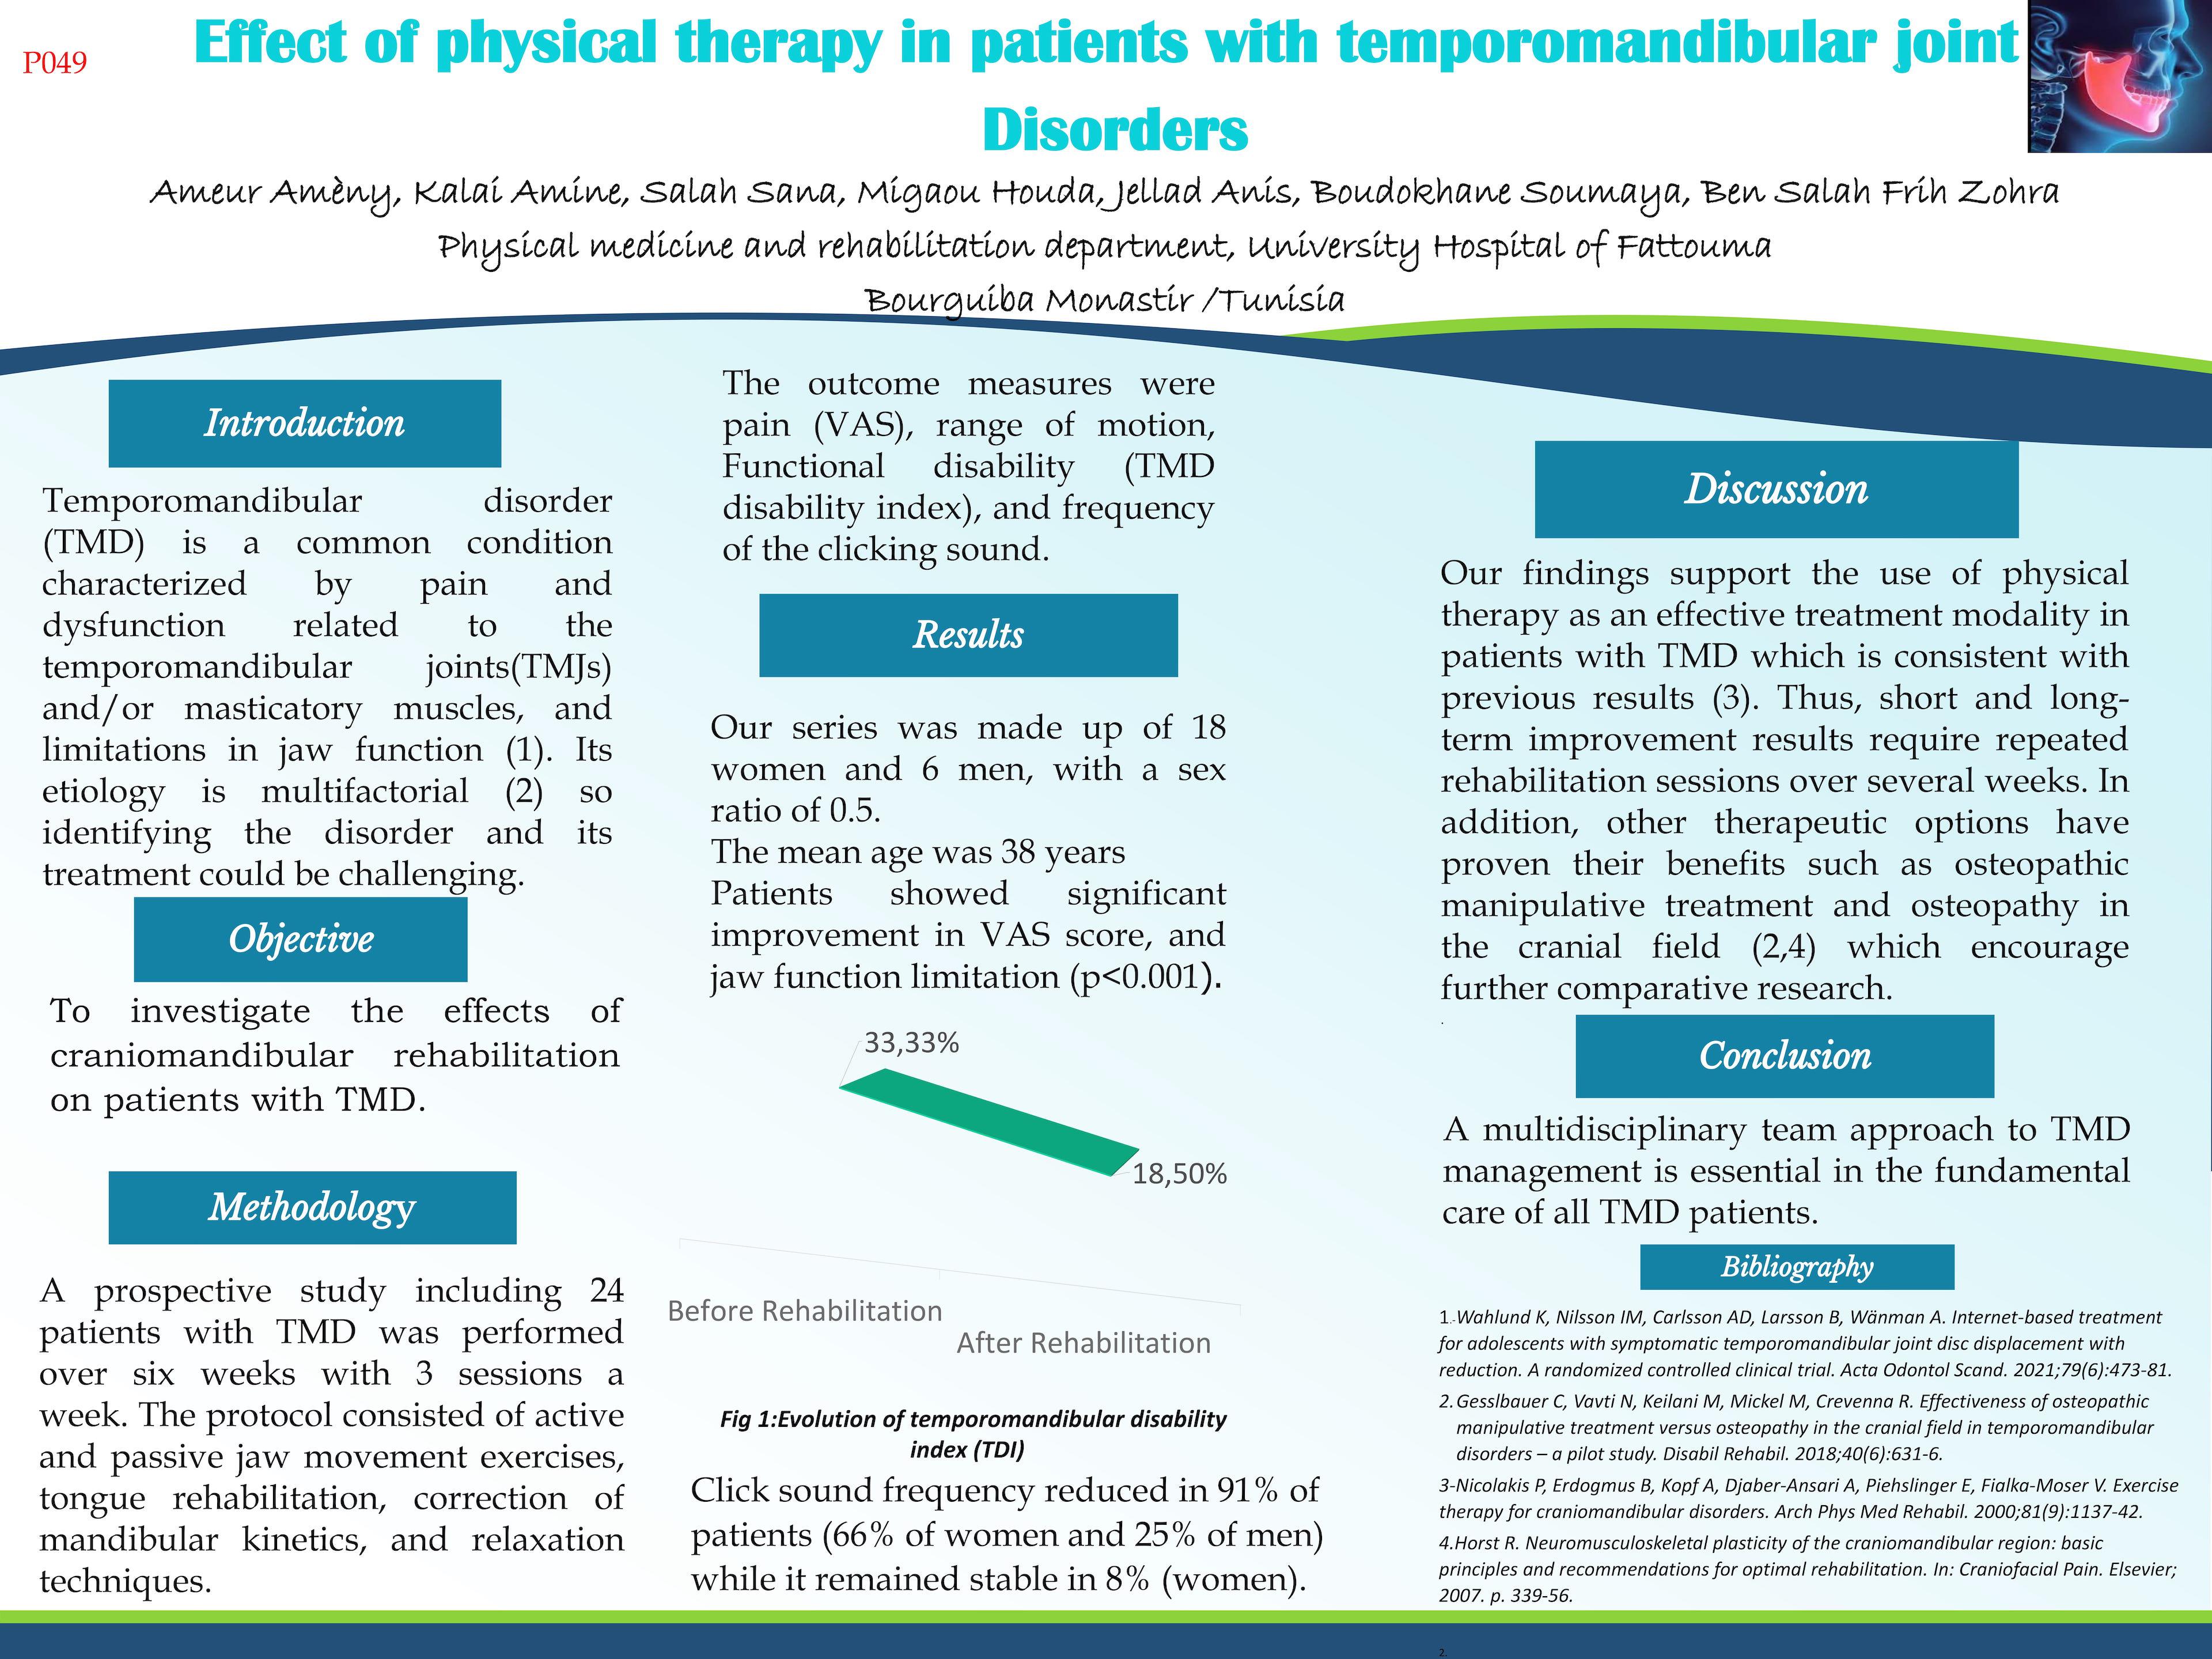 Effectis of physical therapy in patients with temporomandibular joint disorders